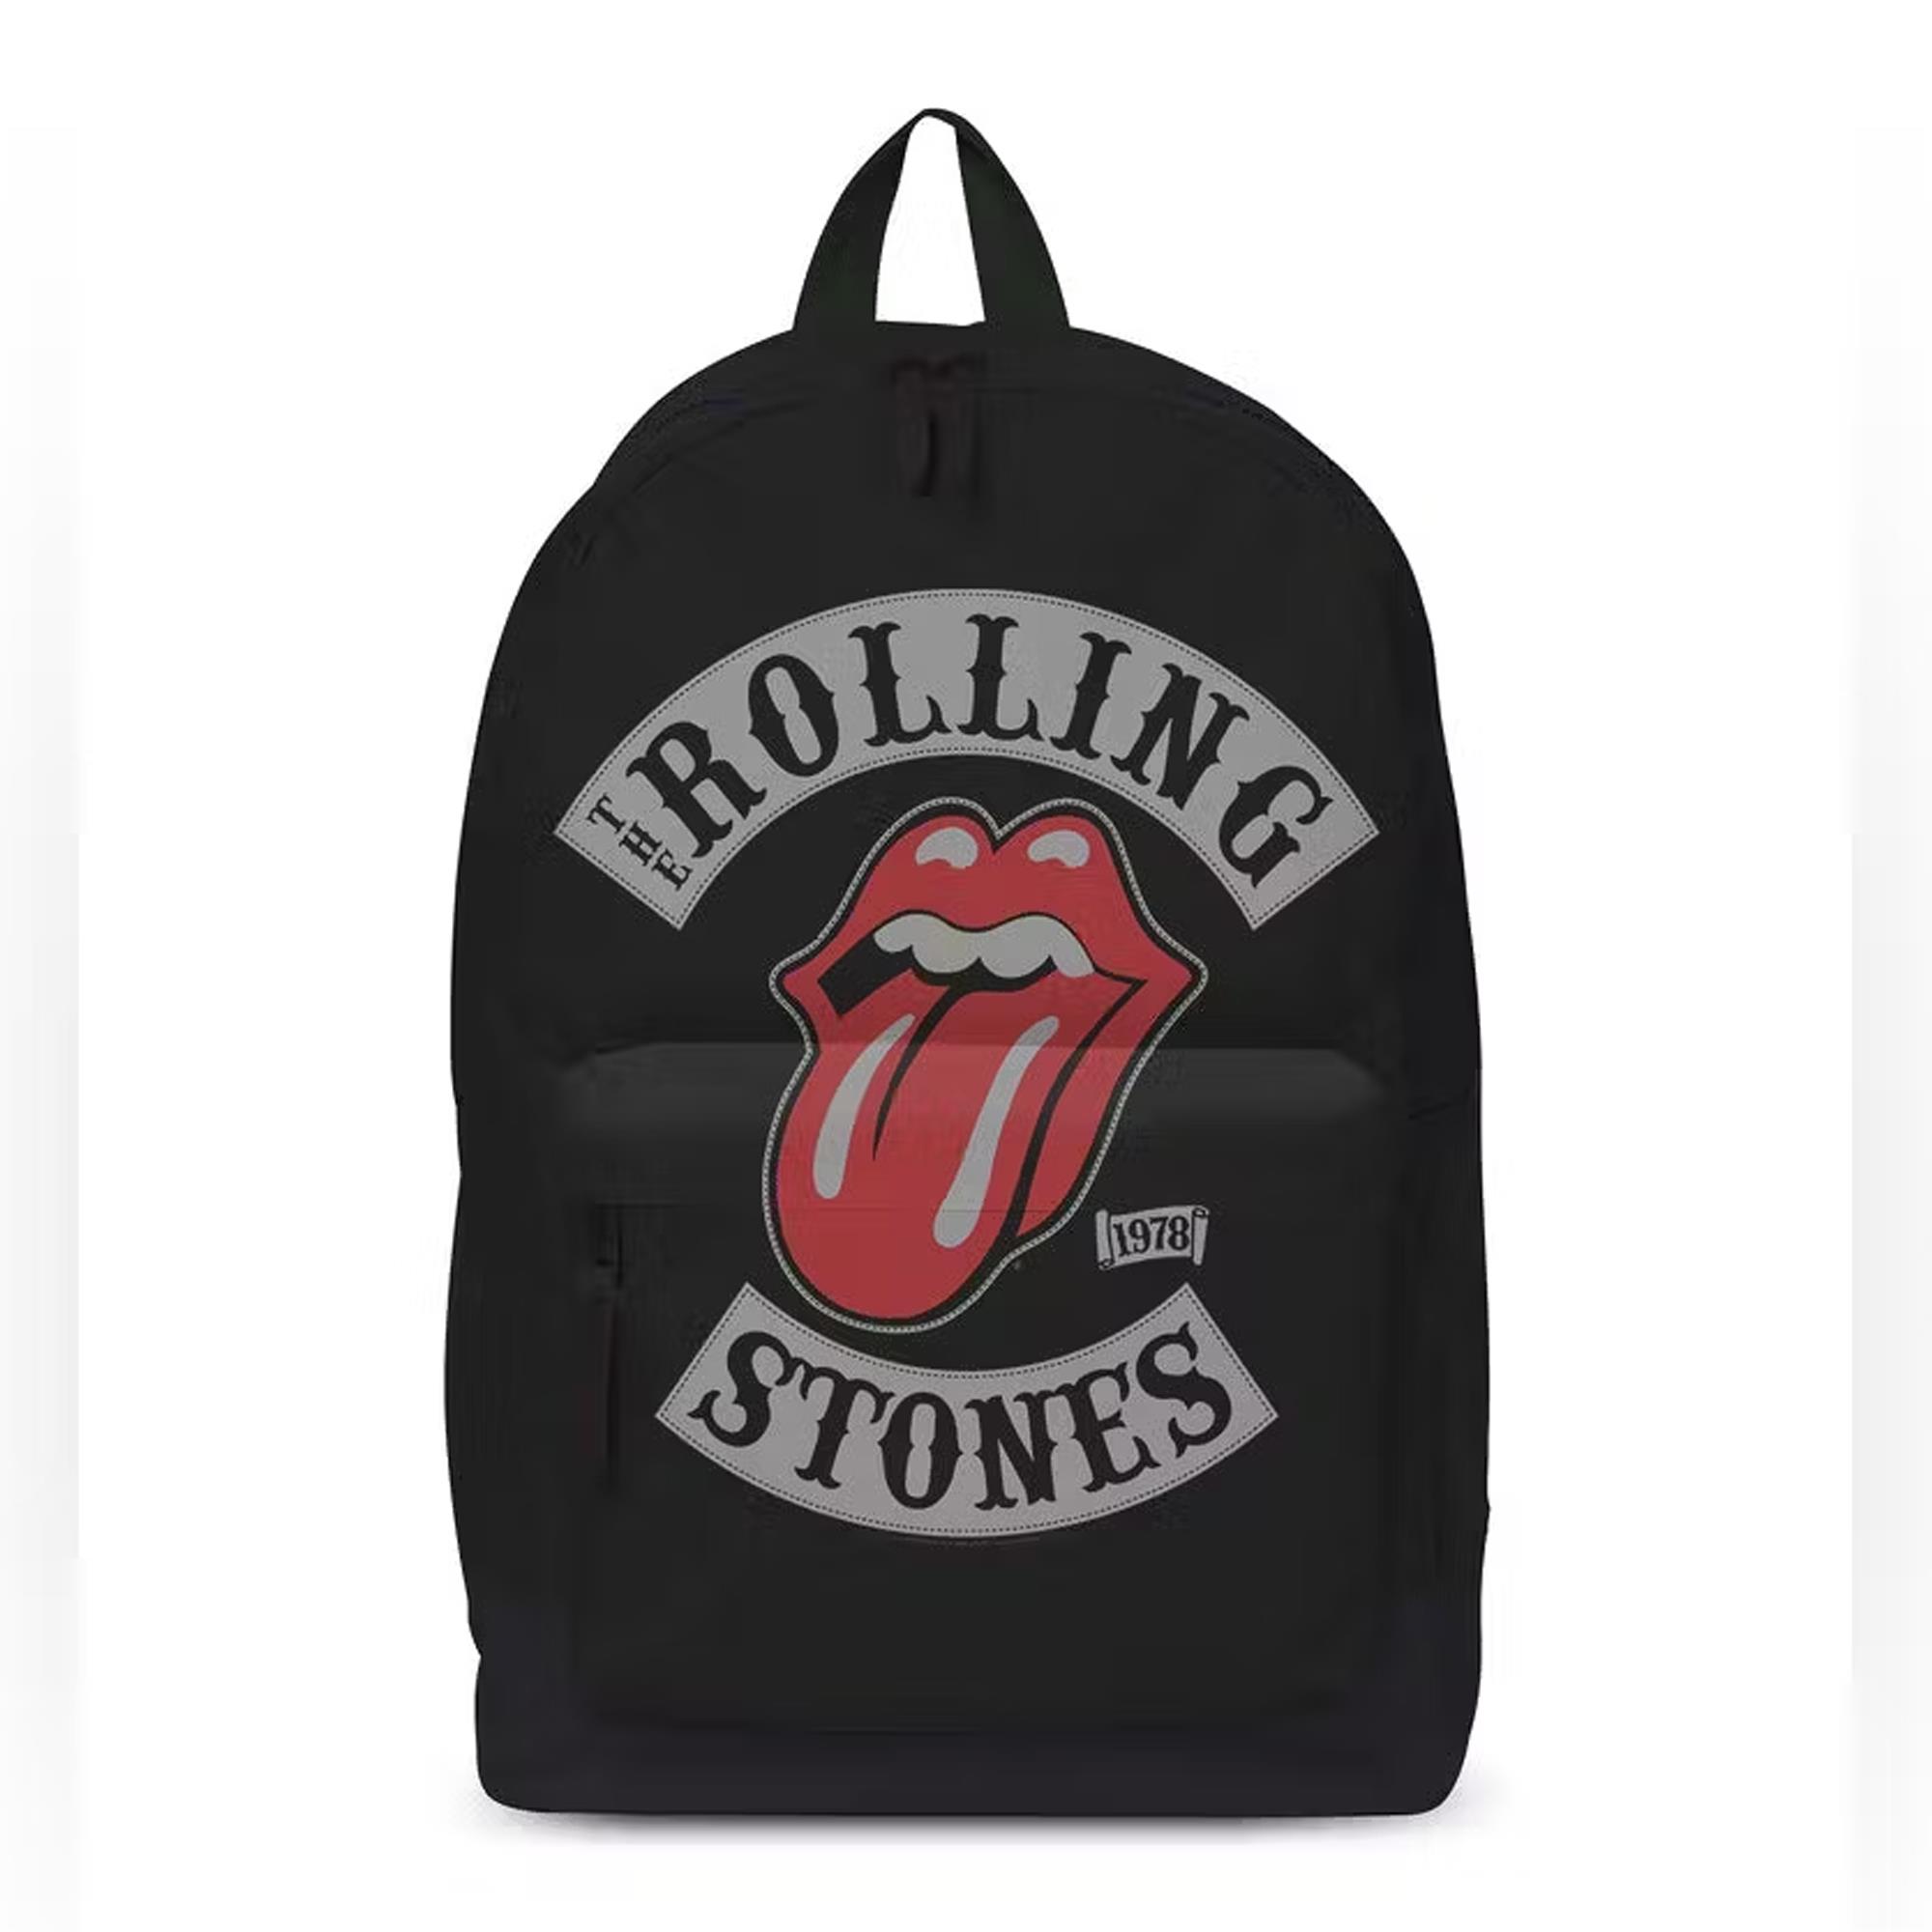 1978 Tour Backpack